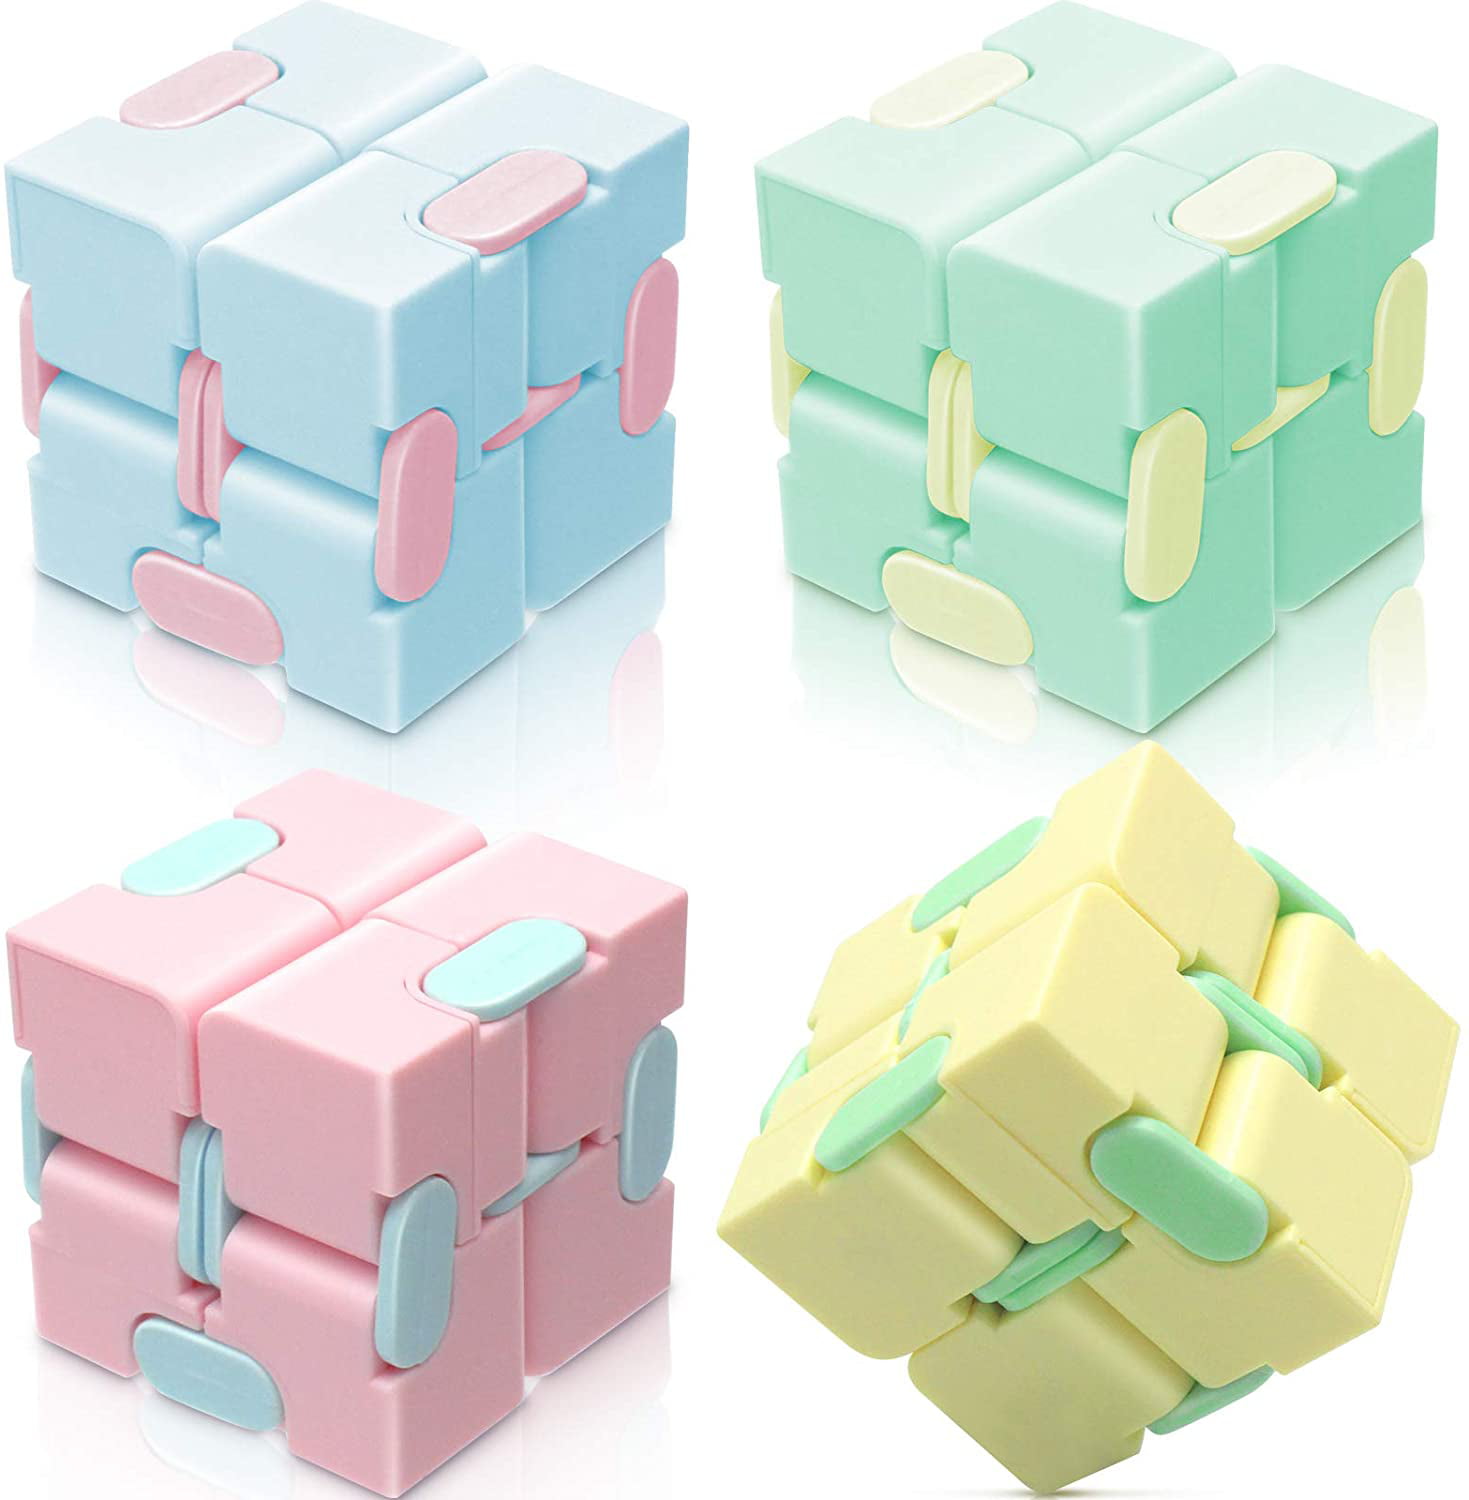 Mini Magic Cubes Sensory Finger Toys for Stress Relief & Anxiety ADHD Colorful Fidget Blocks Desk Toys for Adults Teens Kids Relaxing Party Gift YISHIDANY 4Pcs Infinity Cube Fidget Toy Pack 